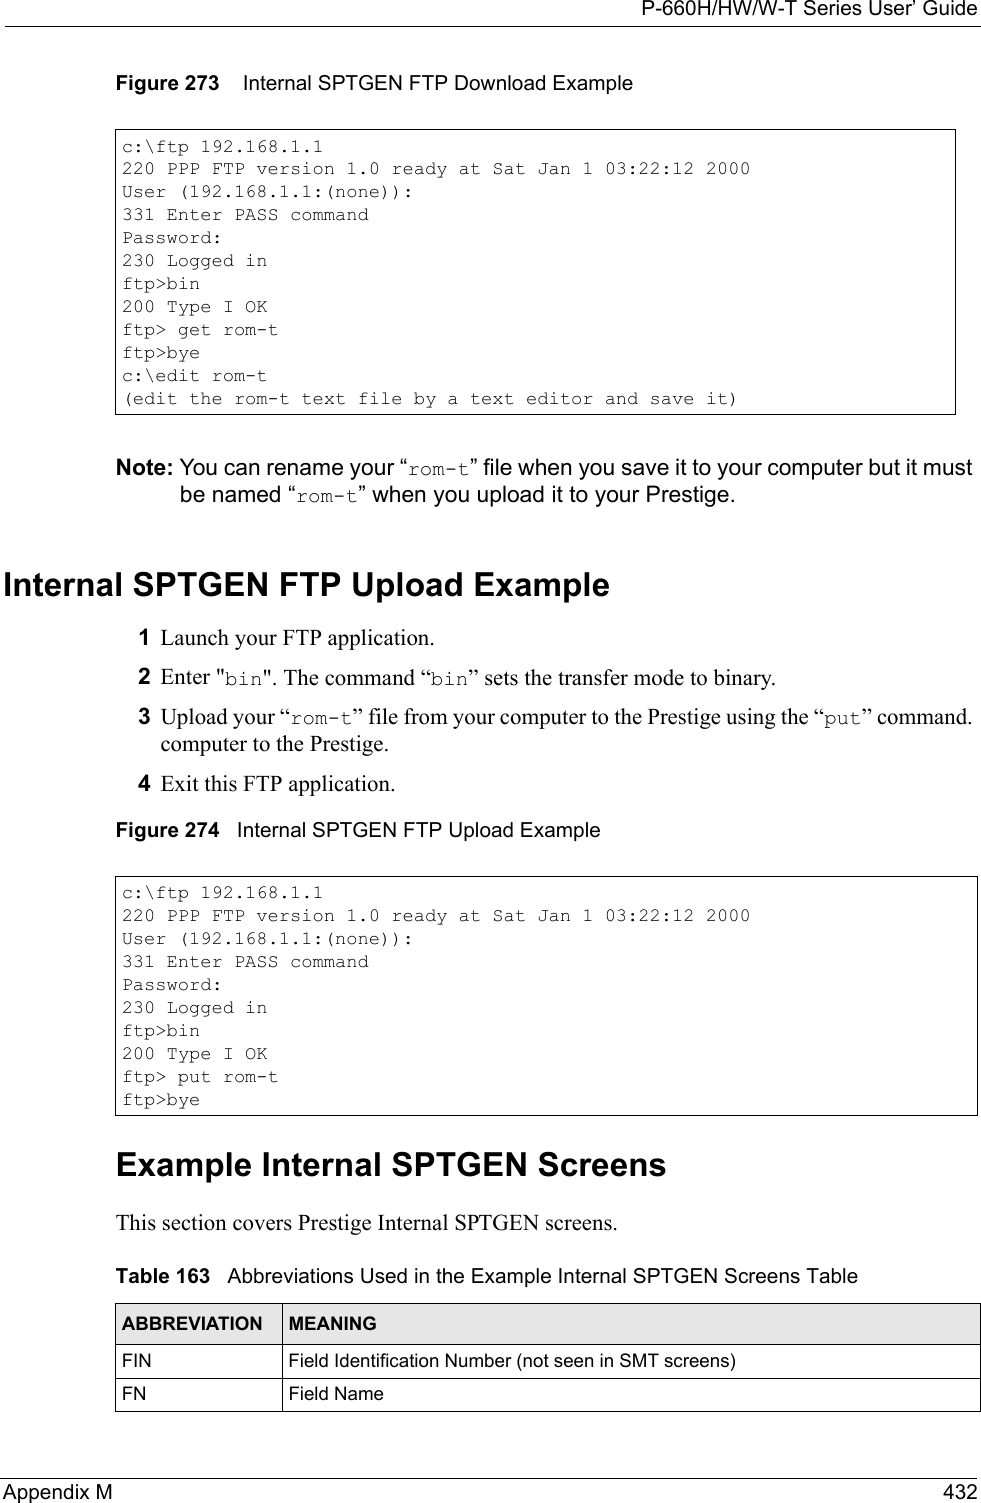 P-660H/HW/W-T Series User’ GuideAppendix M 432Figure 273    Internal SPTGEN FTP Download ExampleNote: You can rename your “rom-t” file when you save it to your computer but it must be named “rom-t” when you upload it to your Prestige.Internal SPTGEN FTP Upload Example1Launch your FTP application.2Enter &quot;bin&quot;. The command “bin” sets the transfer mode to binary.3Upload your “rom-t” file from your computer to the Prestige using the “put” command. computer to the Prestige.4Exit this FTP application.Figure 274   Internal SPTGEN FTP Upload ExampleExample Internal SPTGEN Screens This section covers Prestige Internal SPTGEN screens. c:\ftp 192.168.1.1220 PPP FTP version 1.0 ready at Sat Jan 1 03:22:12 2000User (192.168.1.1:(none)):331 Enter PASS commandPassword:230 Logged inftp&gt;bin200 Type I OKftp&gt; get rom-tftp&gt;byec:\edit rom-t(edit the rom-t text file by a text editor and save it)c:\ftp 192.168.1.1220 PPP FTP version 1.0 ready at Sat Jan 1 03:22:12 2000User (192.168.1.1:(none)):331 Enter PASS commandPassword:230 Logged inftp&gt;bin200 Type I OKftp&gt; put rom-tftp&gt;byeTable 163   Abbreviations Used in the Example Internal SPTGEN Screens TableABBREVIATION MEANINGFIN Field Identification Number (not seen in SMT screens)FN Field Name